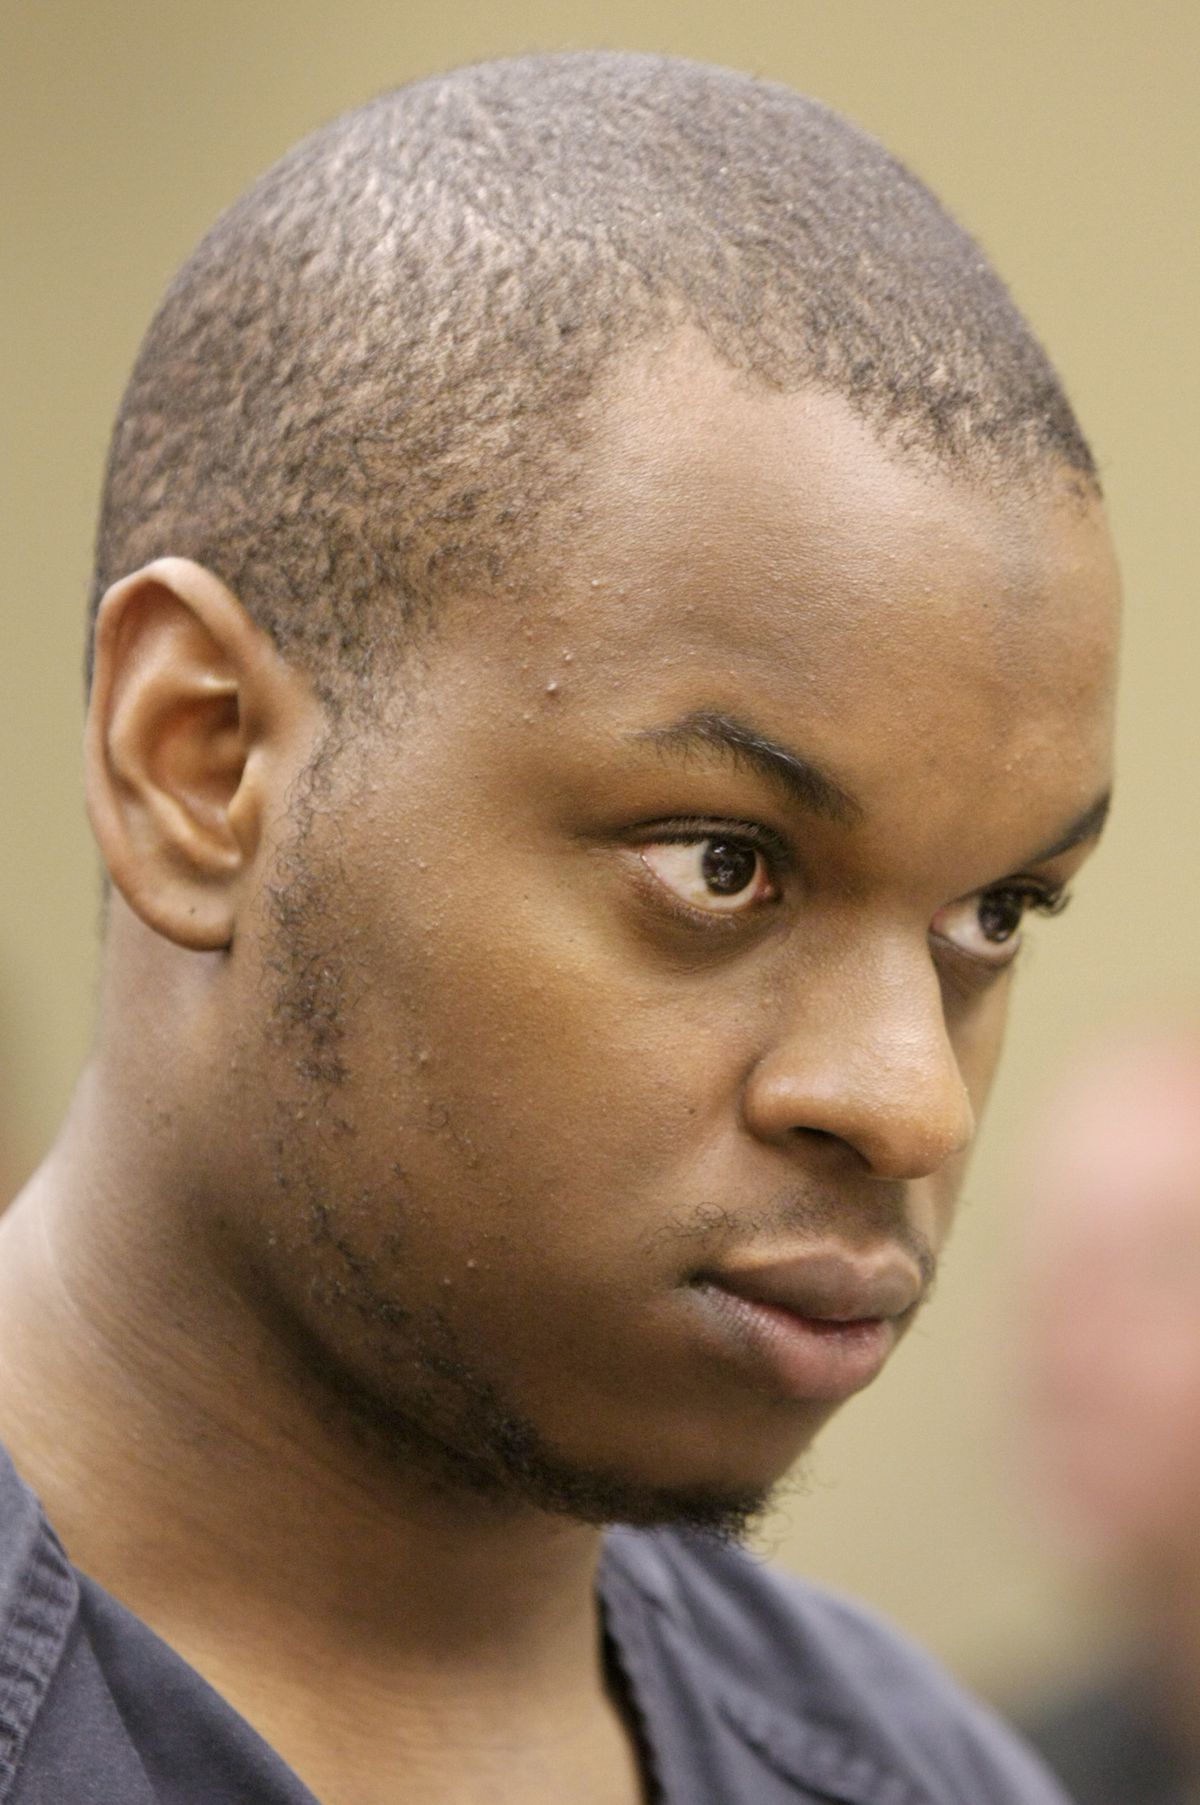 Abdulhakim Muhammad is accused of killing an enlisted man at a recruiting center in Little Rock, Ark., on June 1.  (Associated Press / The Spokesman-Review)